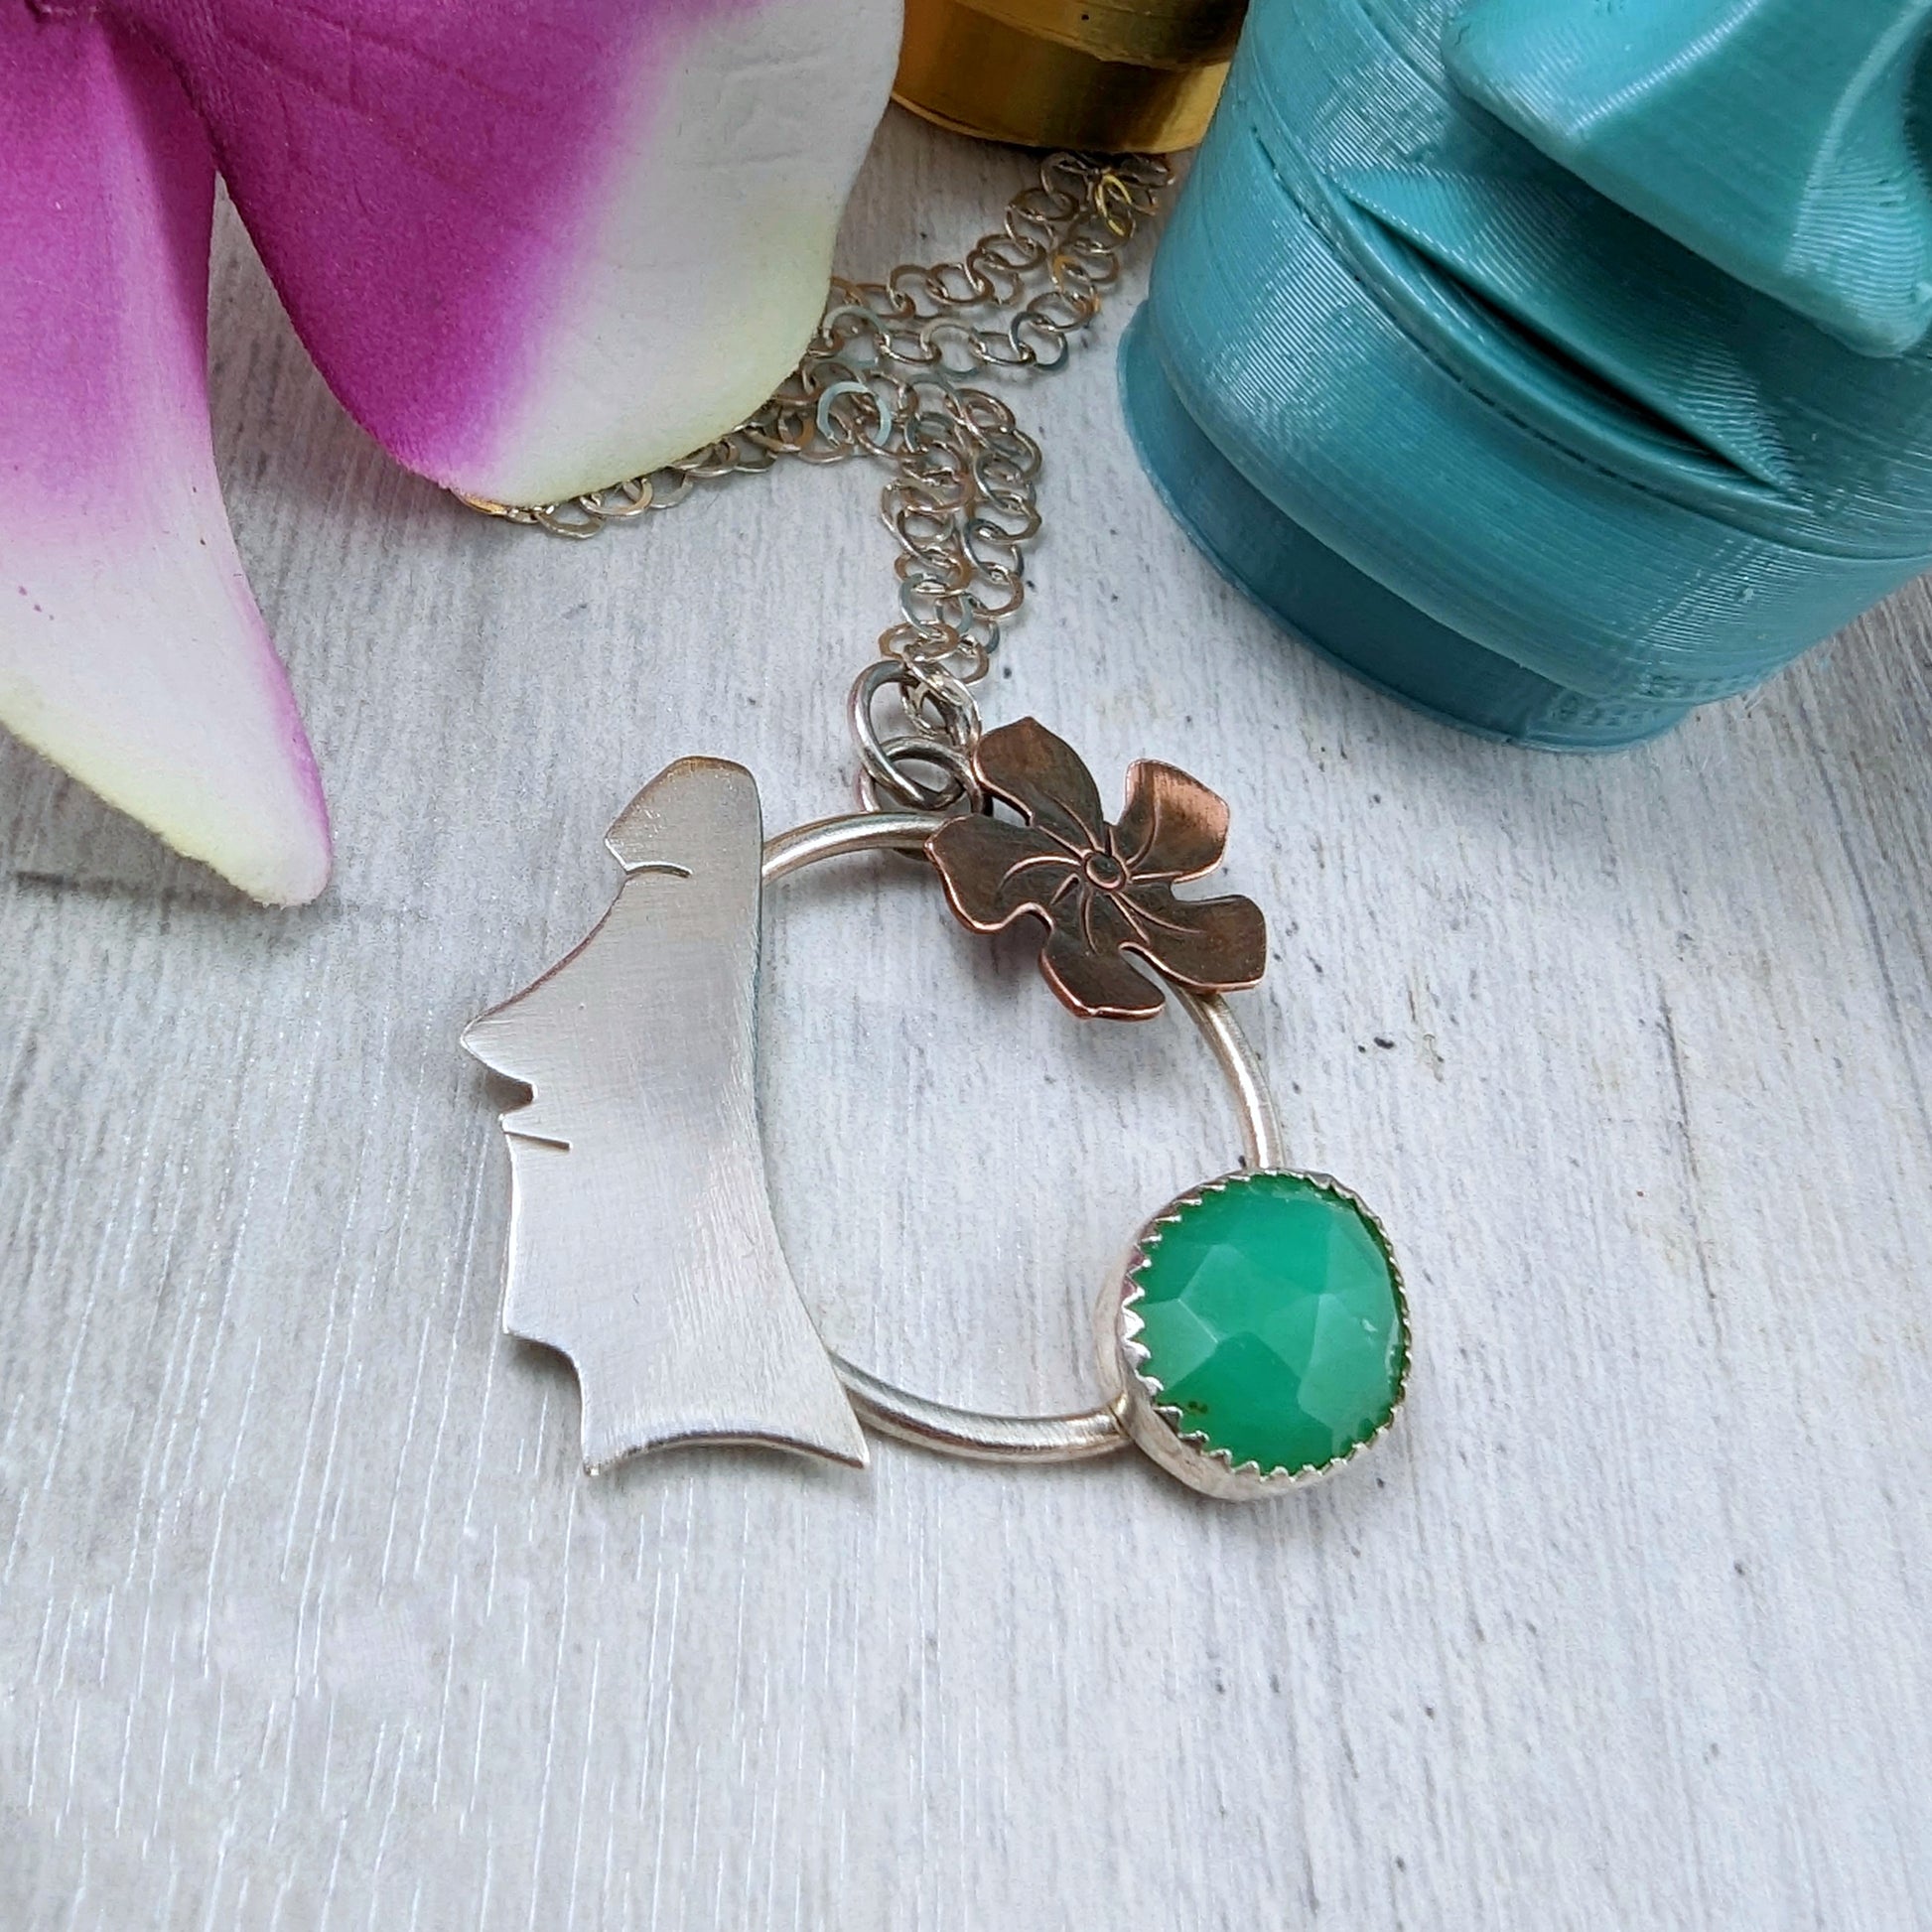 Sterling silver, copper, and chrysoprase necklace on light background with flowers